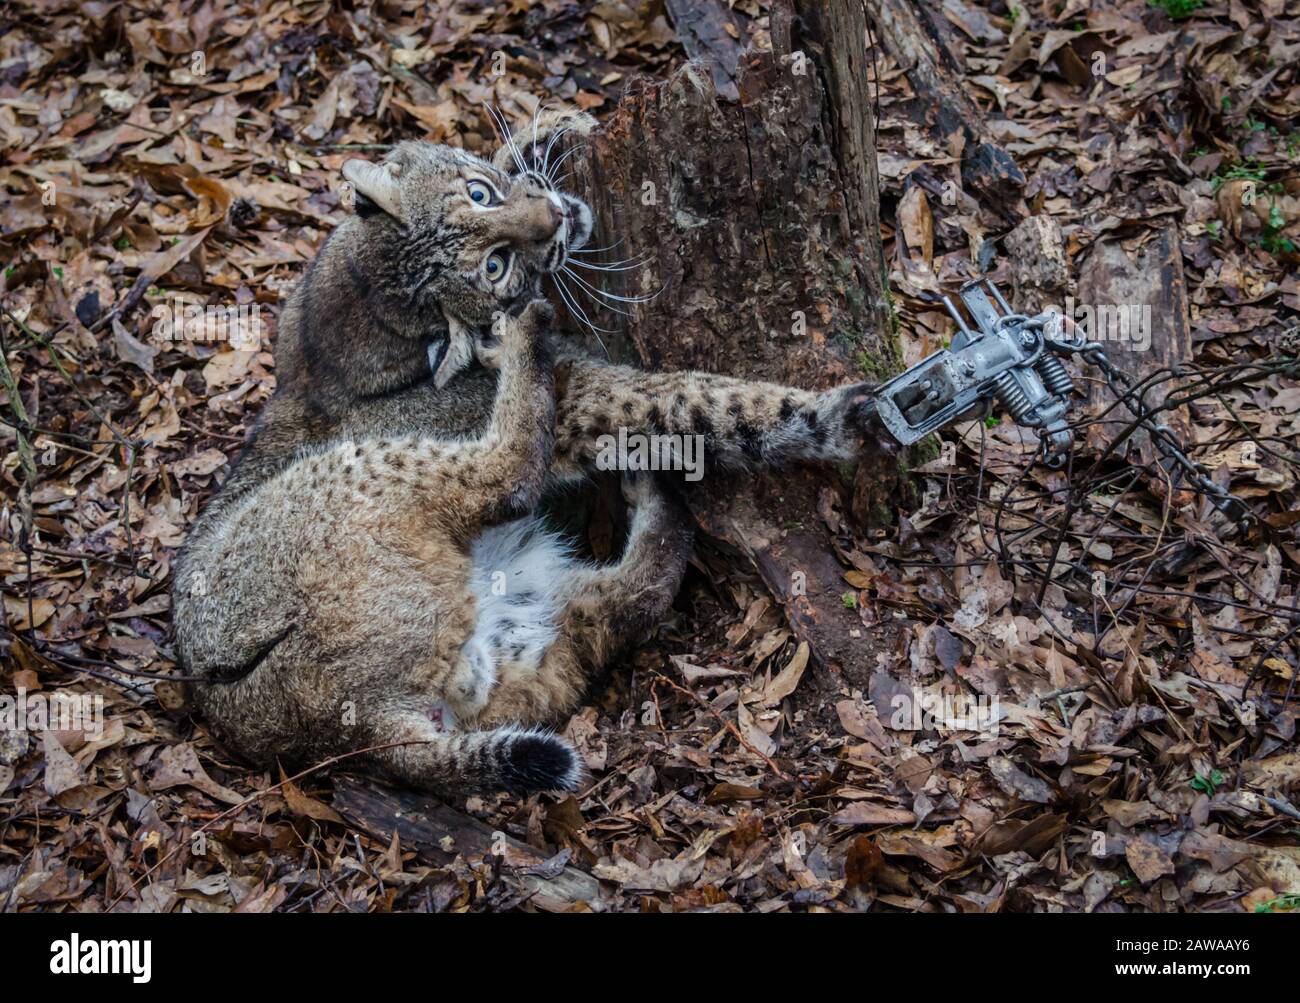 Bobcat feline caught by trapper in live trap.  Wildlife predator trapped in foothold trap. Management and recreational sport activity, animal trapping Stock Photo